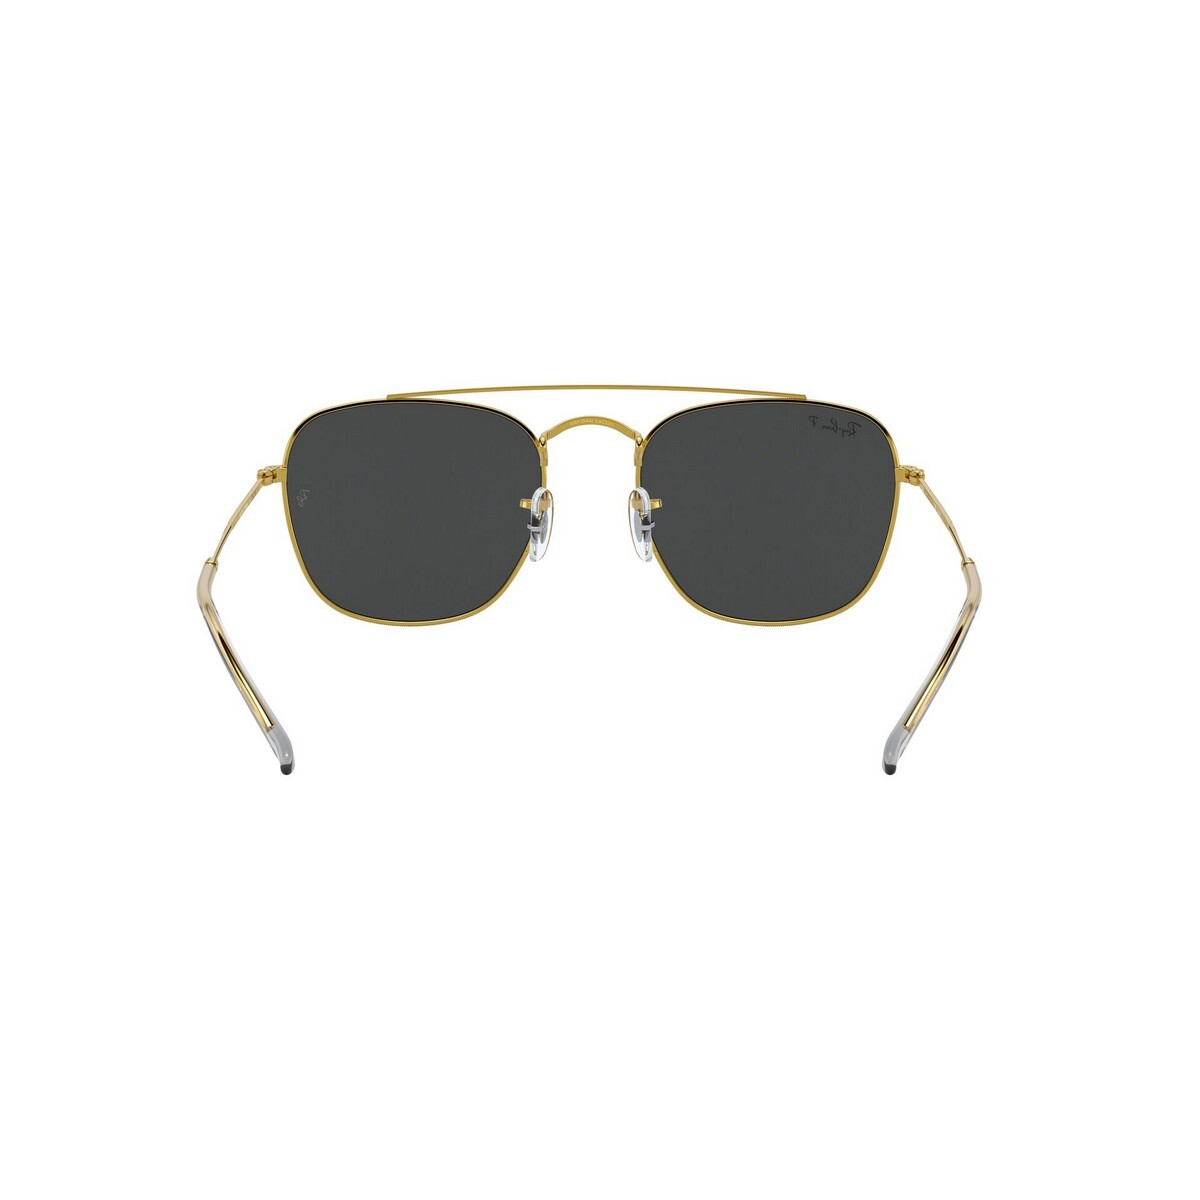 Rayban Mens Legend Gold Frame With Black Lens Sunglass